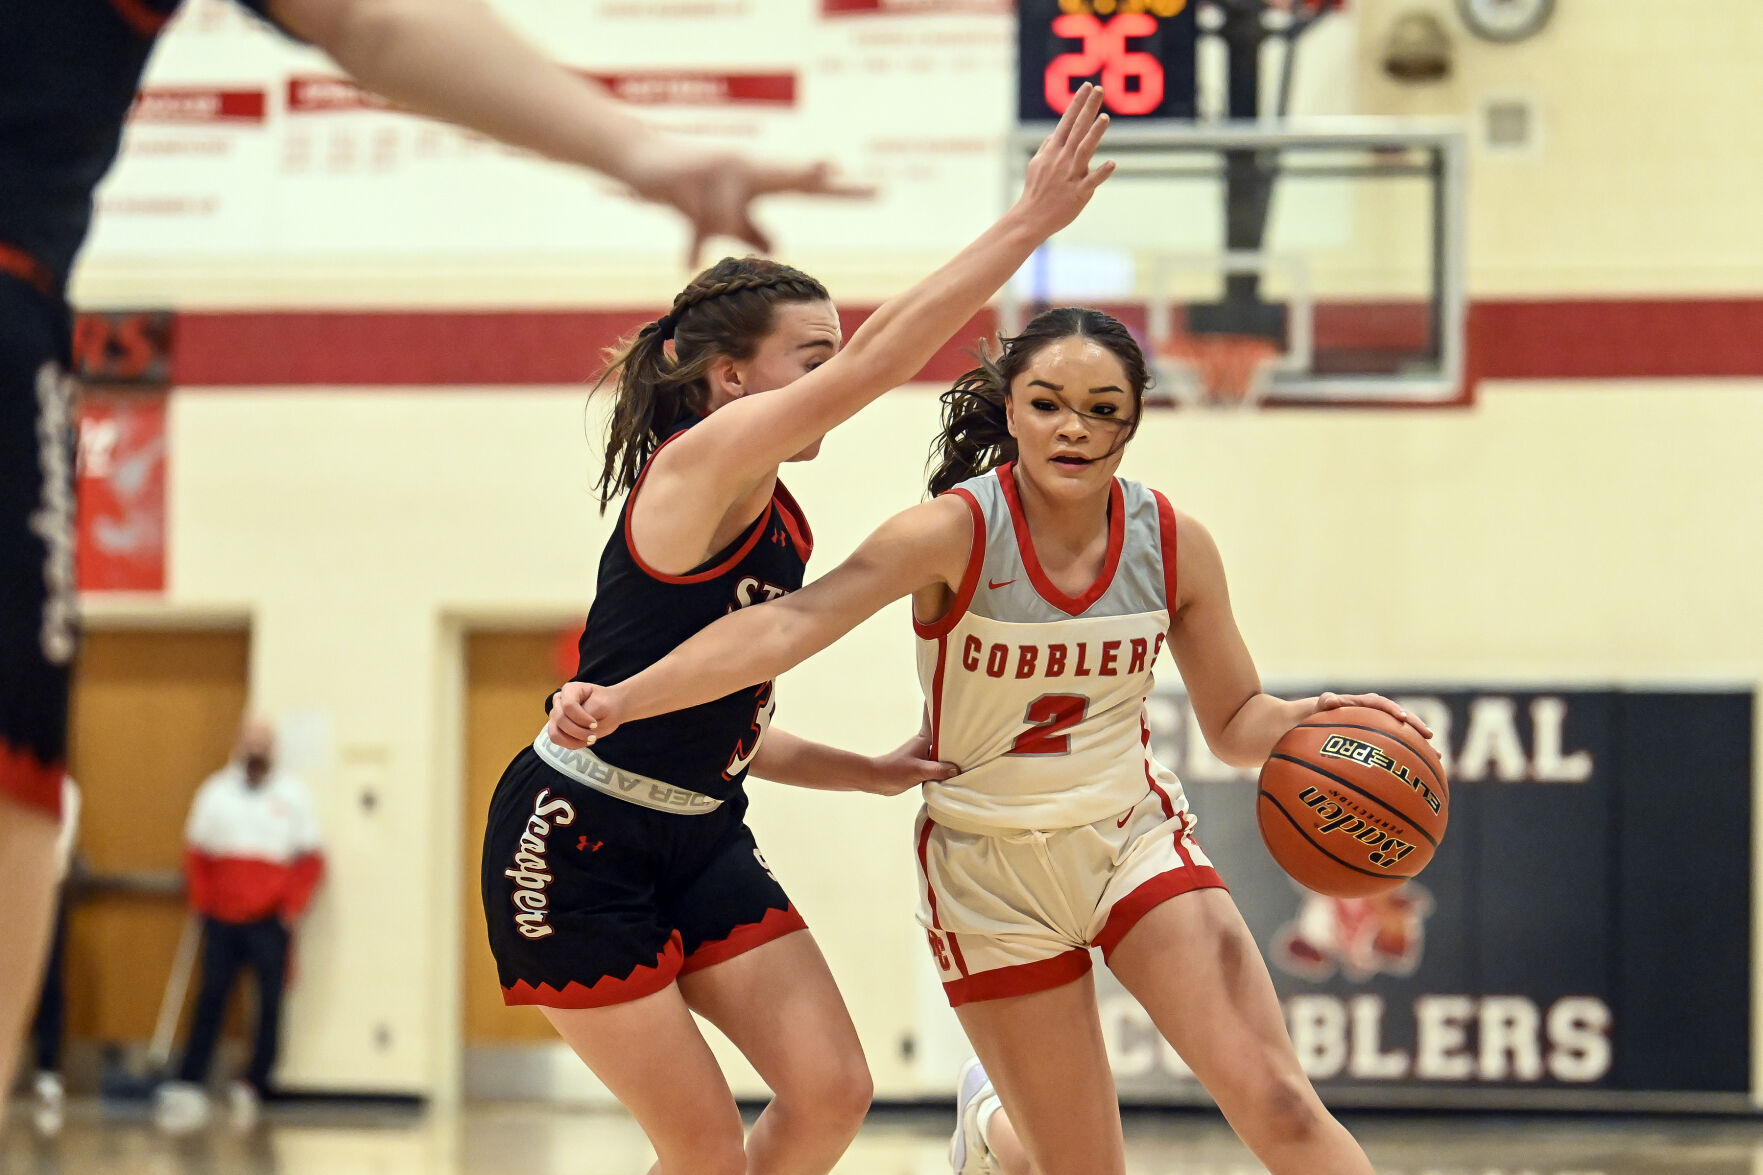 Leah Landry’s Double-Double Leads Central Girls Basketball Team to Victory on Senior Night